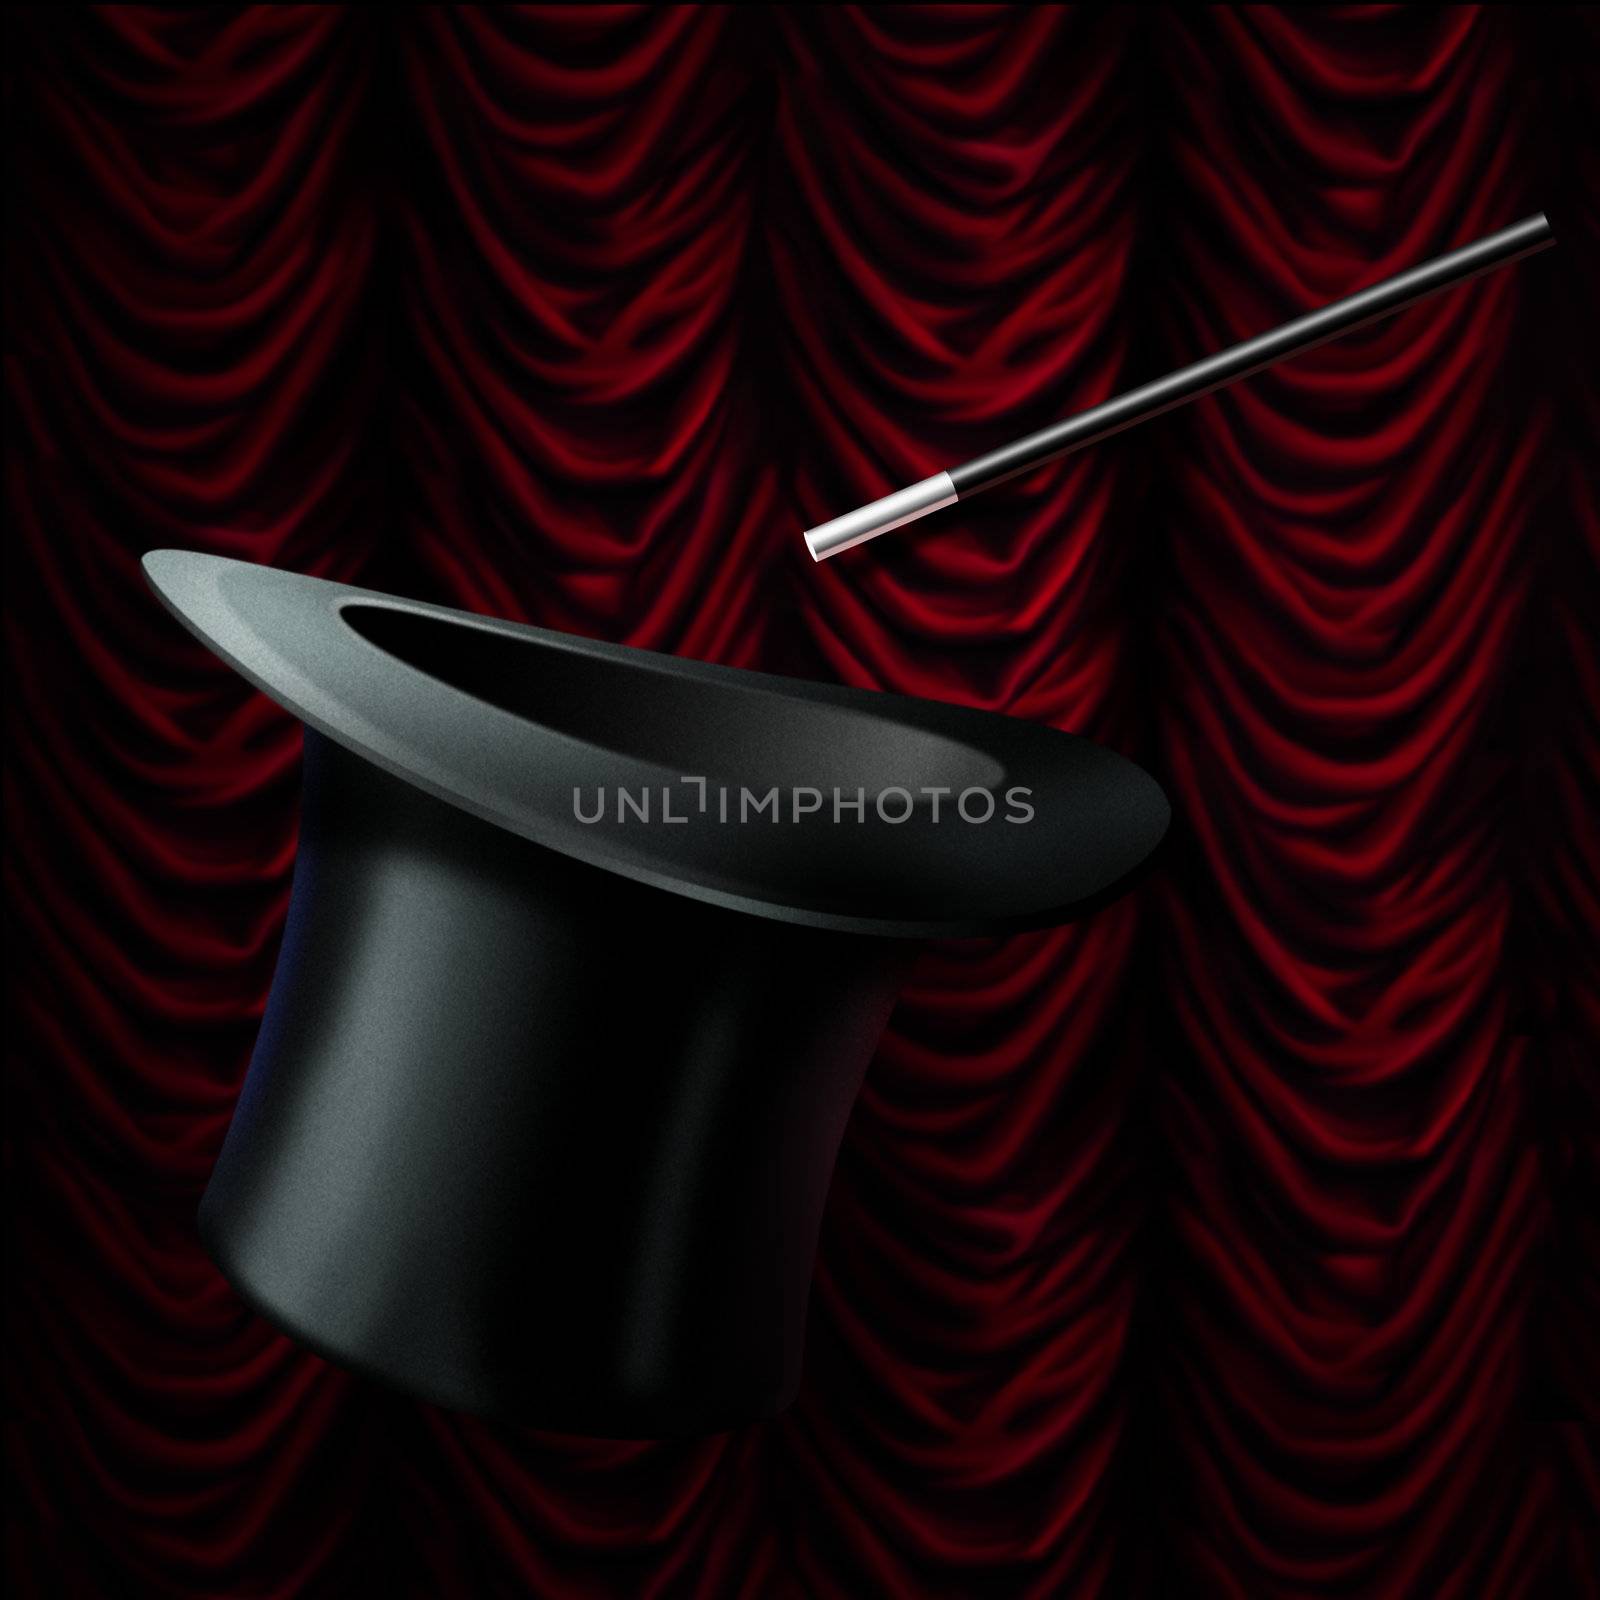 magic black hat and magic wand isolated on red stage curtain by feiillustration